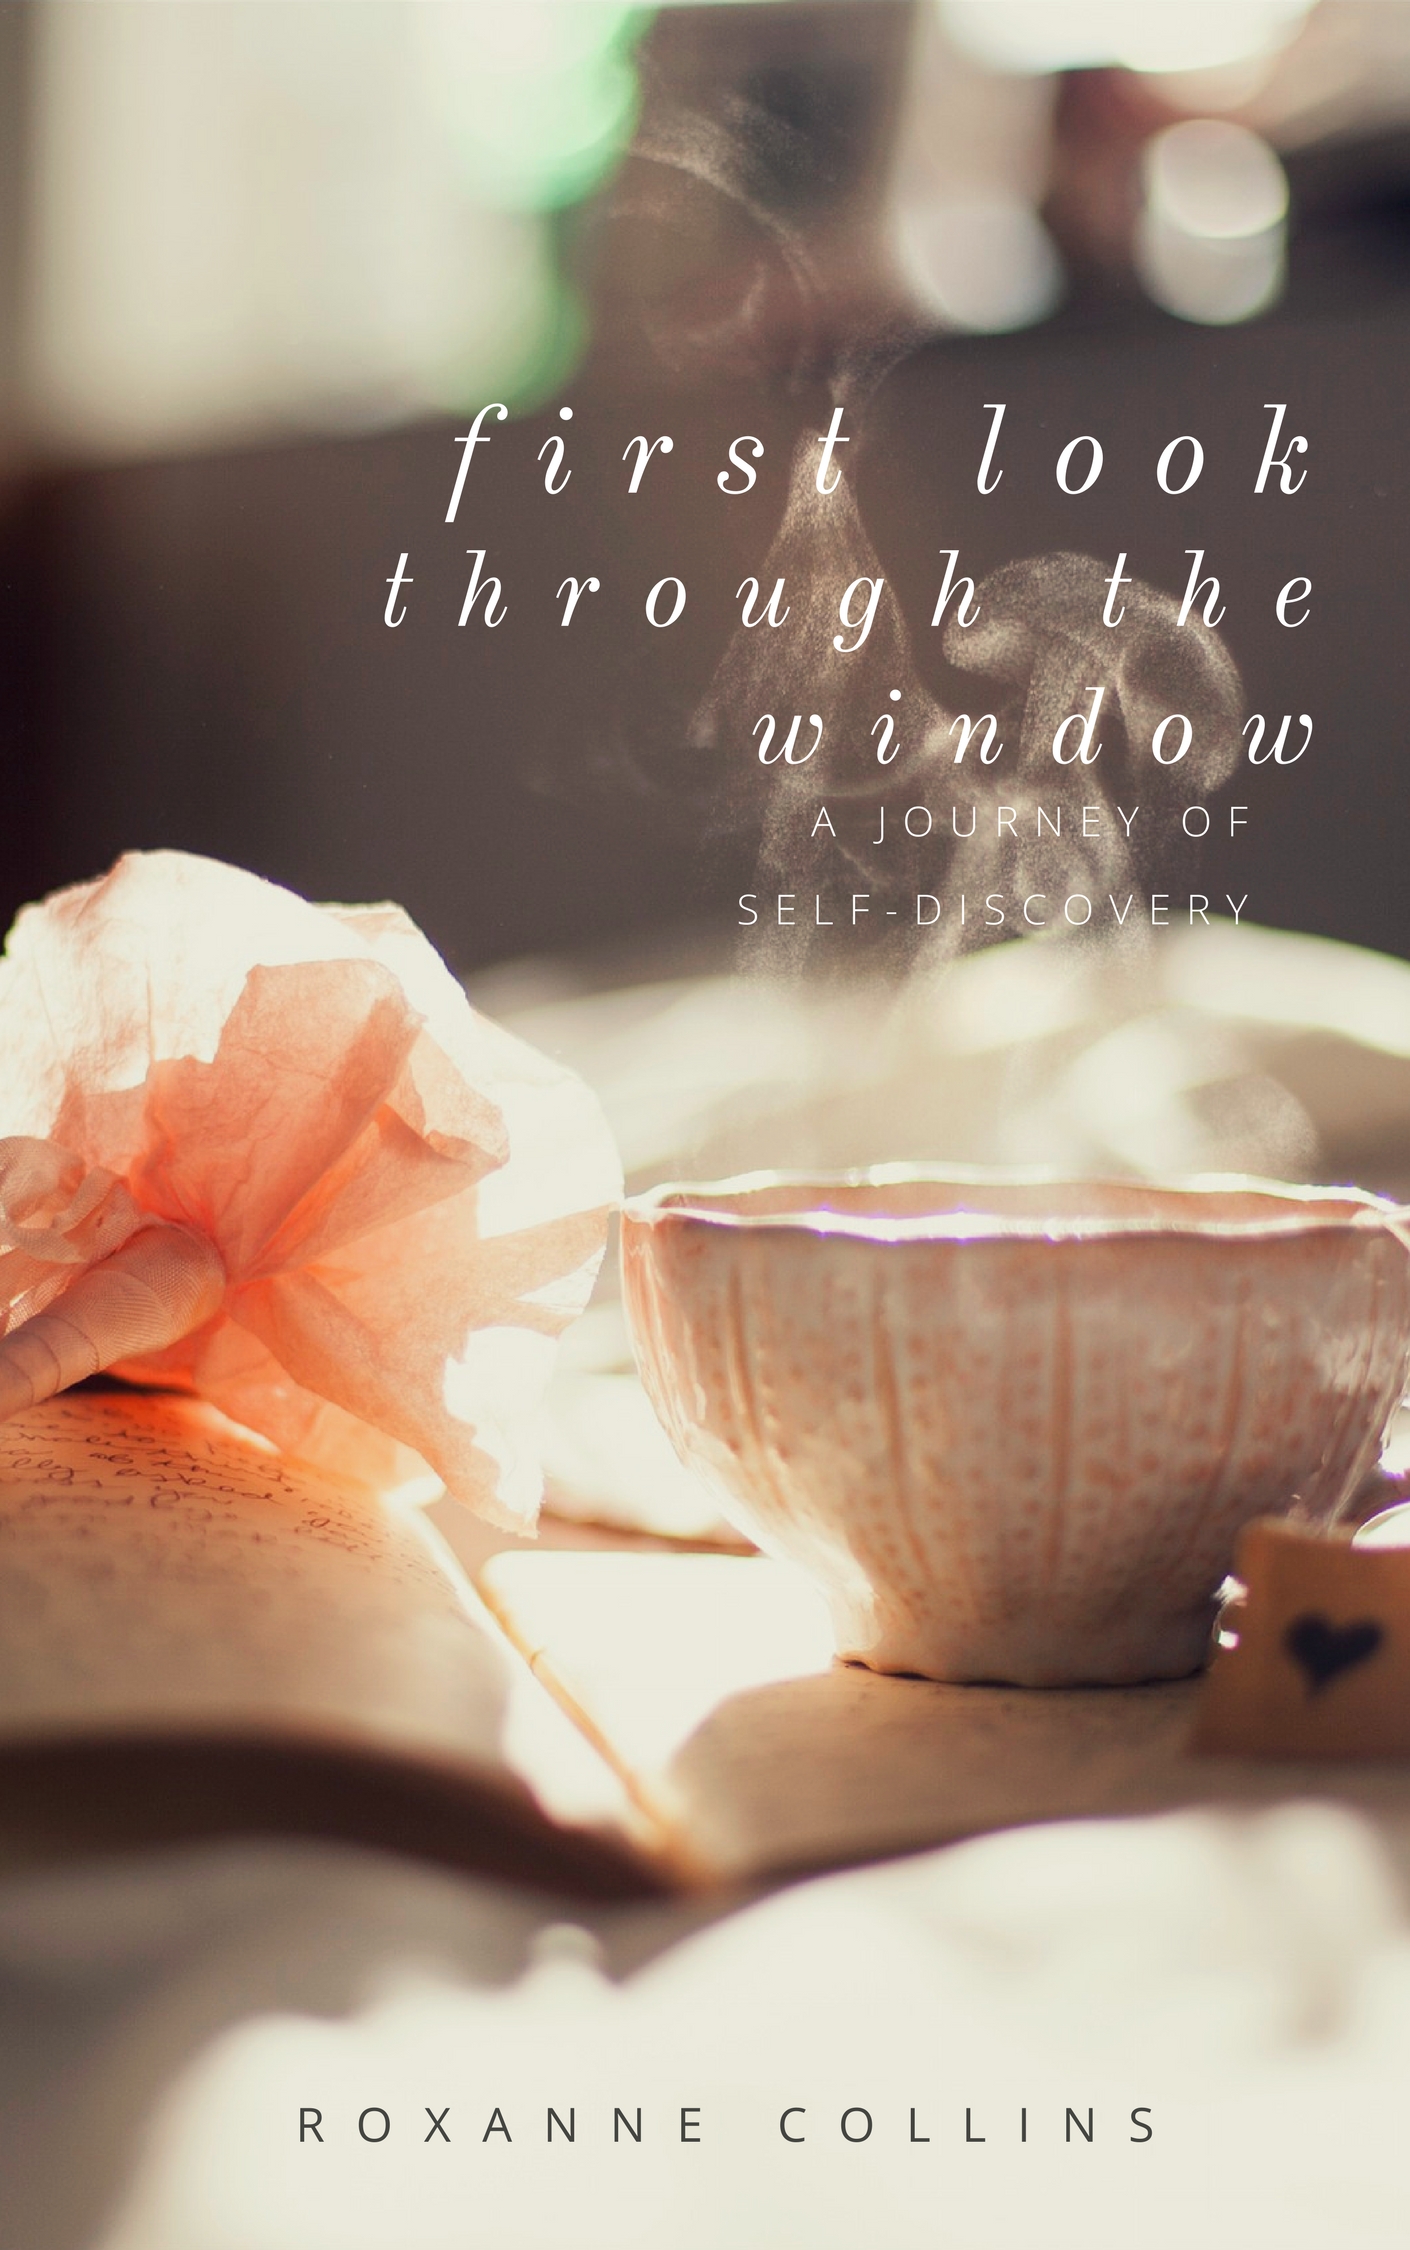 FREE: First Look Through the Window: A Journey of Self-Discovery by Roxanne Collins